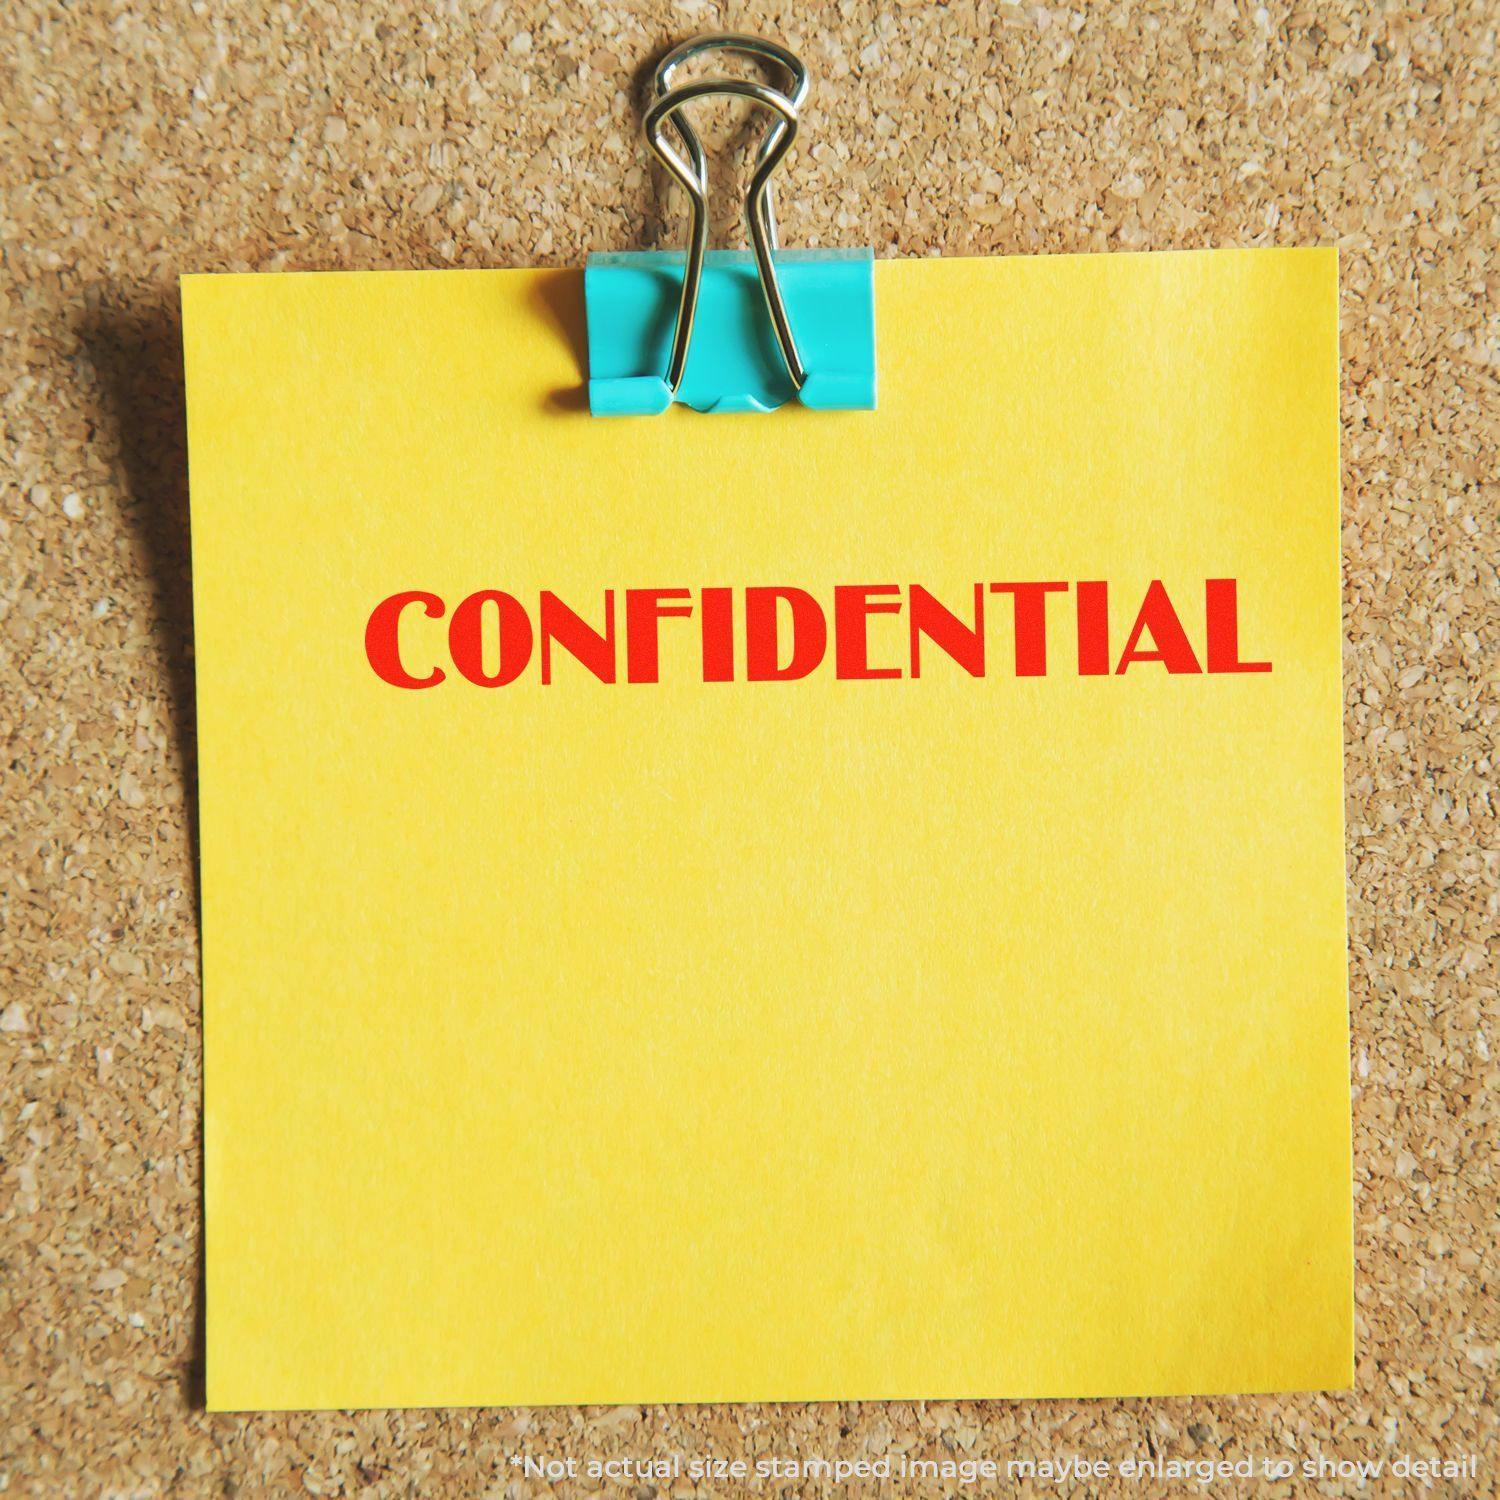 A stock office rubber stamp with a stamped image showing how the text "CONFIDENTIAL" in a large optima font is displayed after stamping.